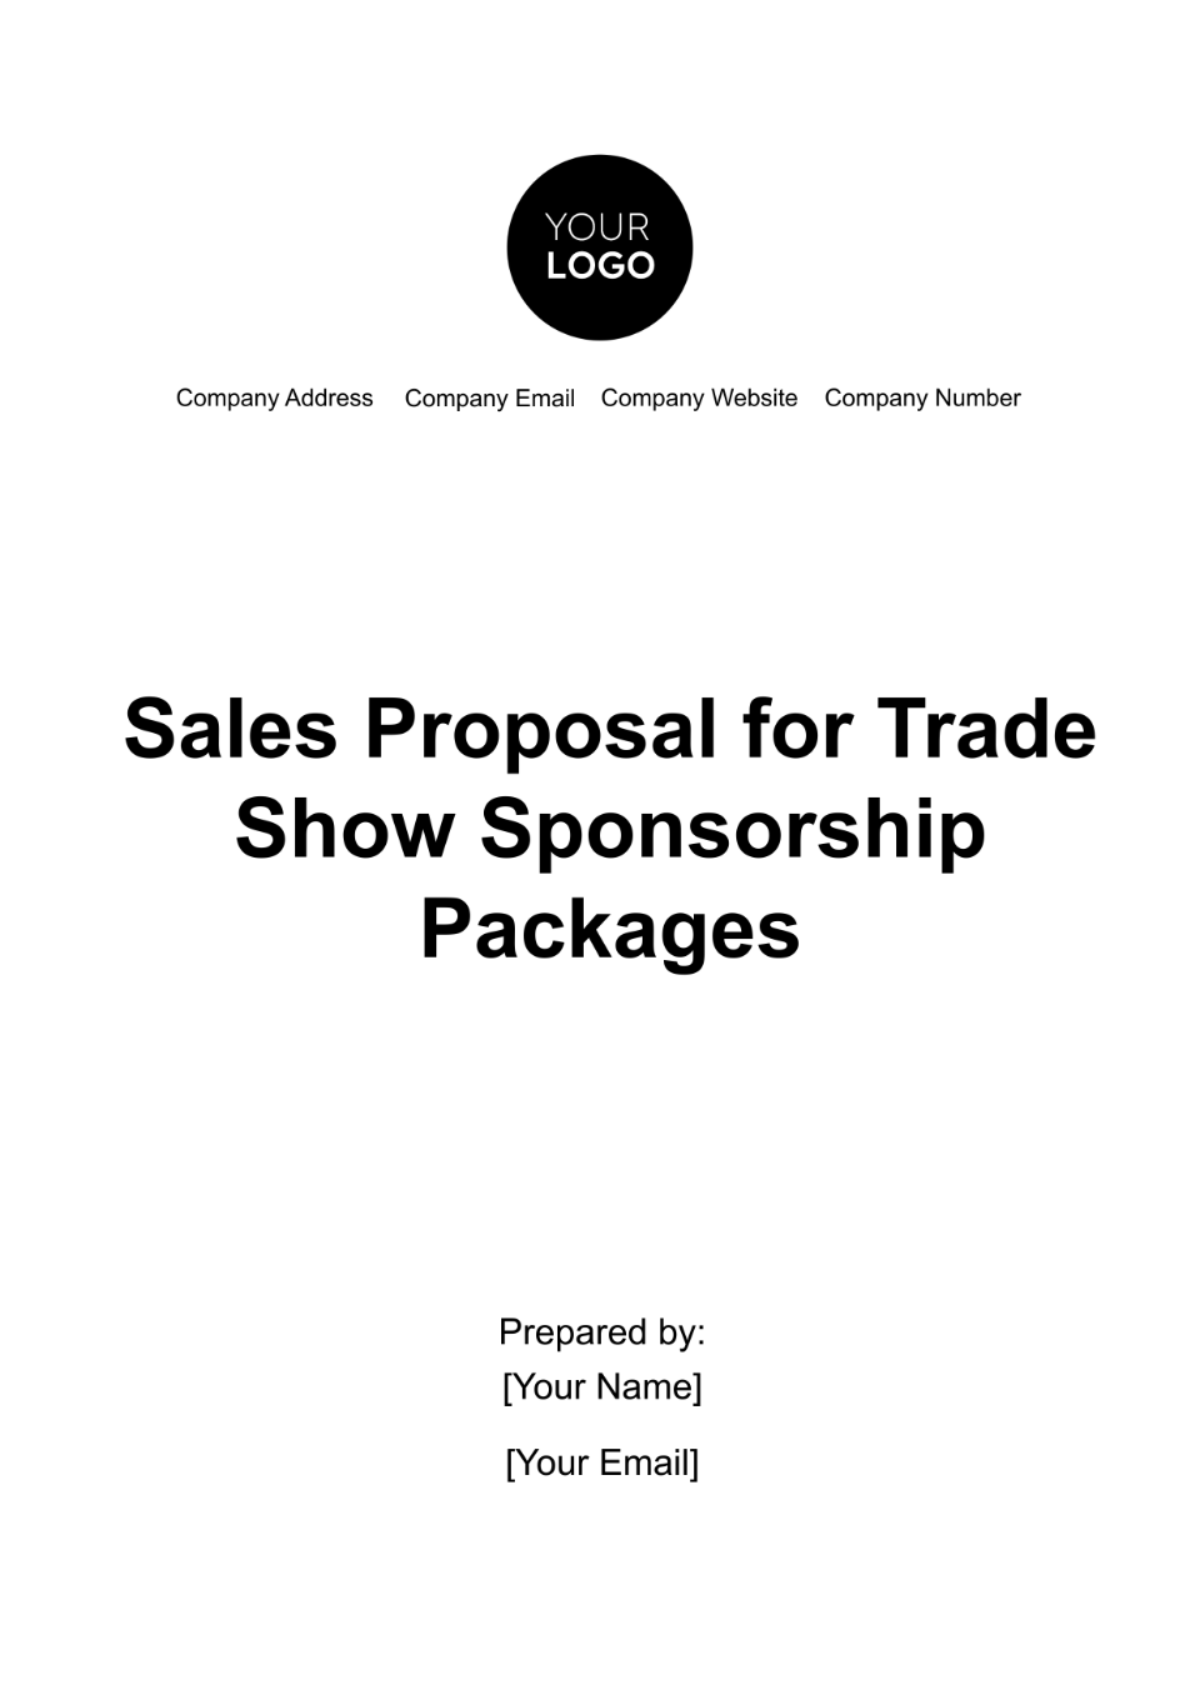 Free Sales Proposal for Trade Show Sponsorship Packages Template